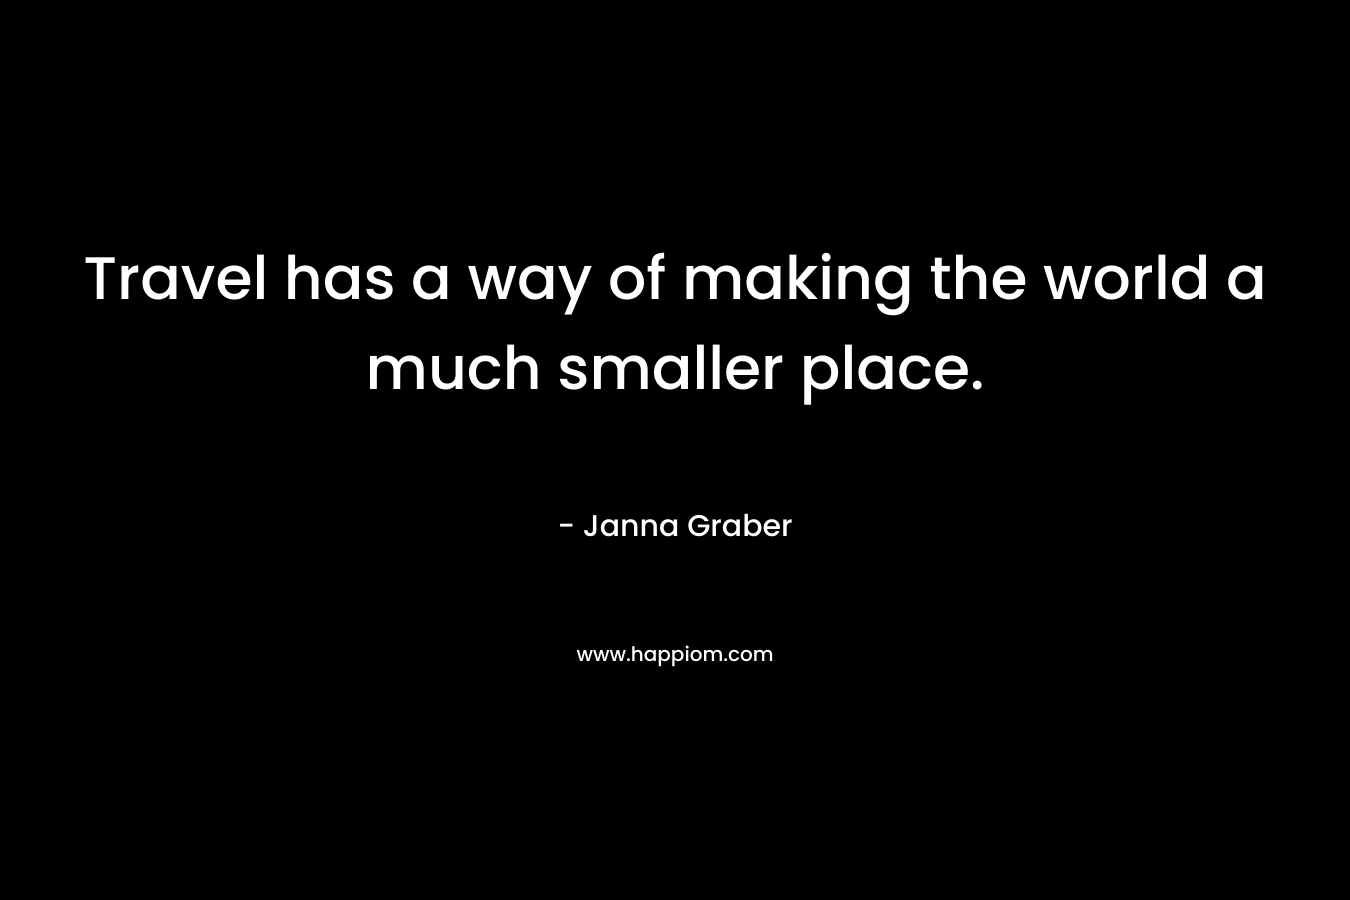 Travel has a way of making the world a much smaller place.